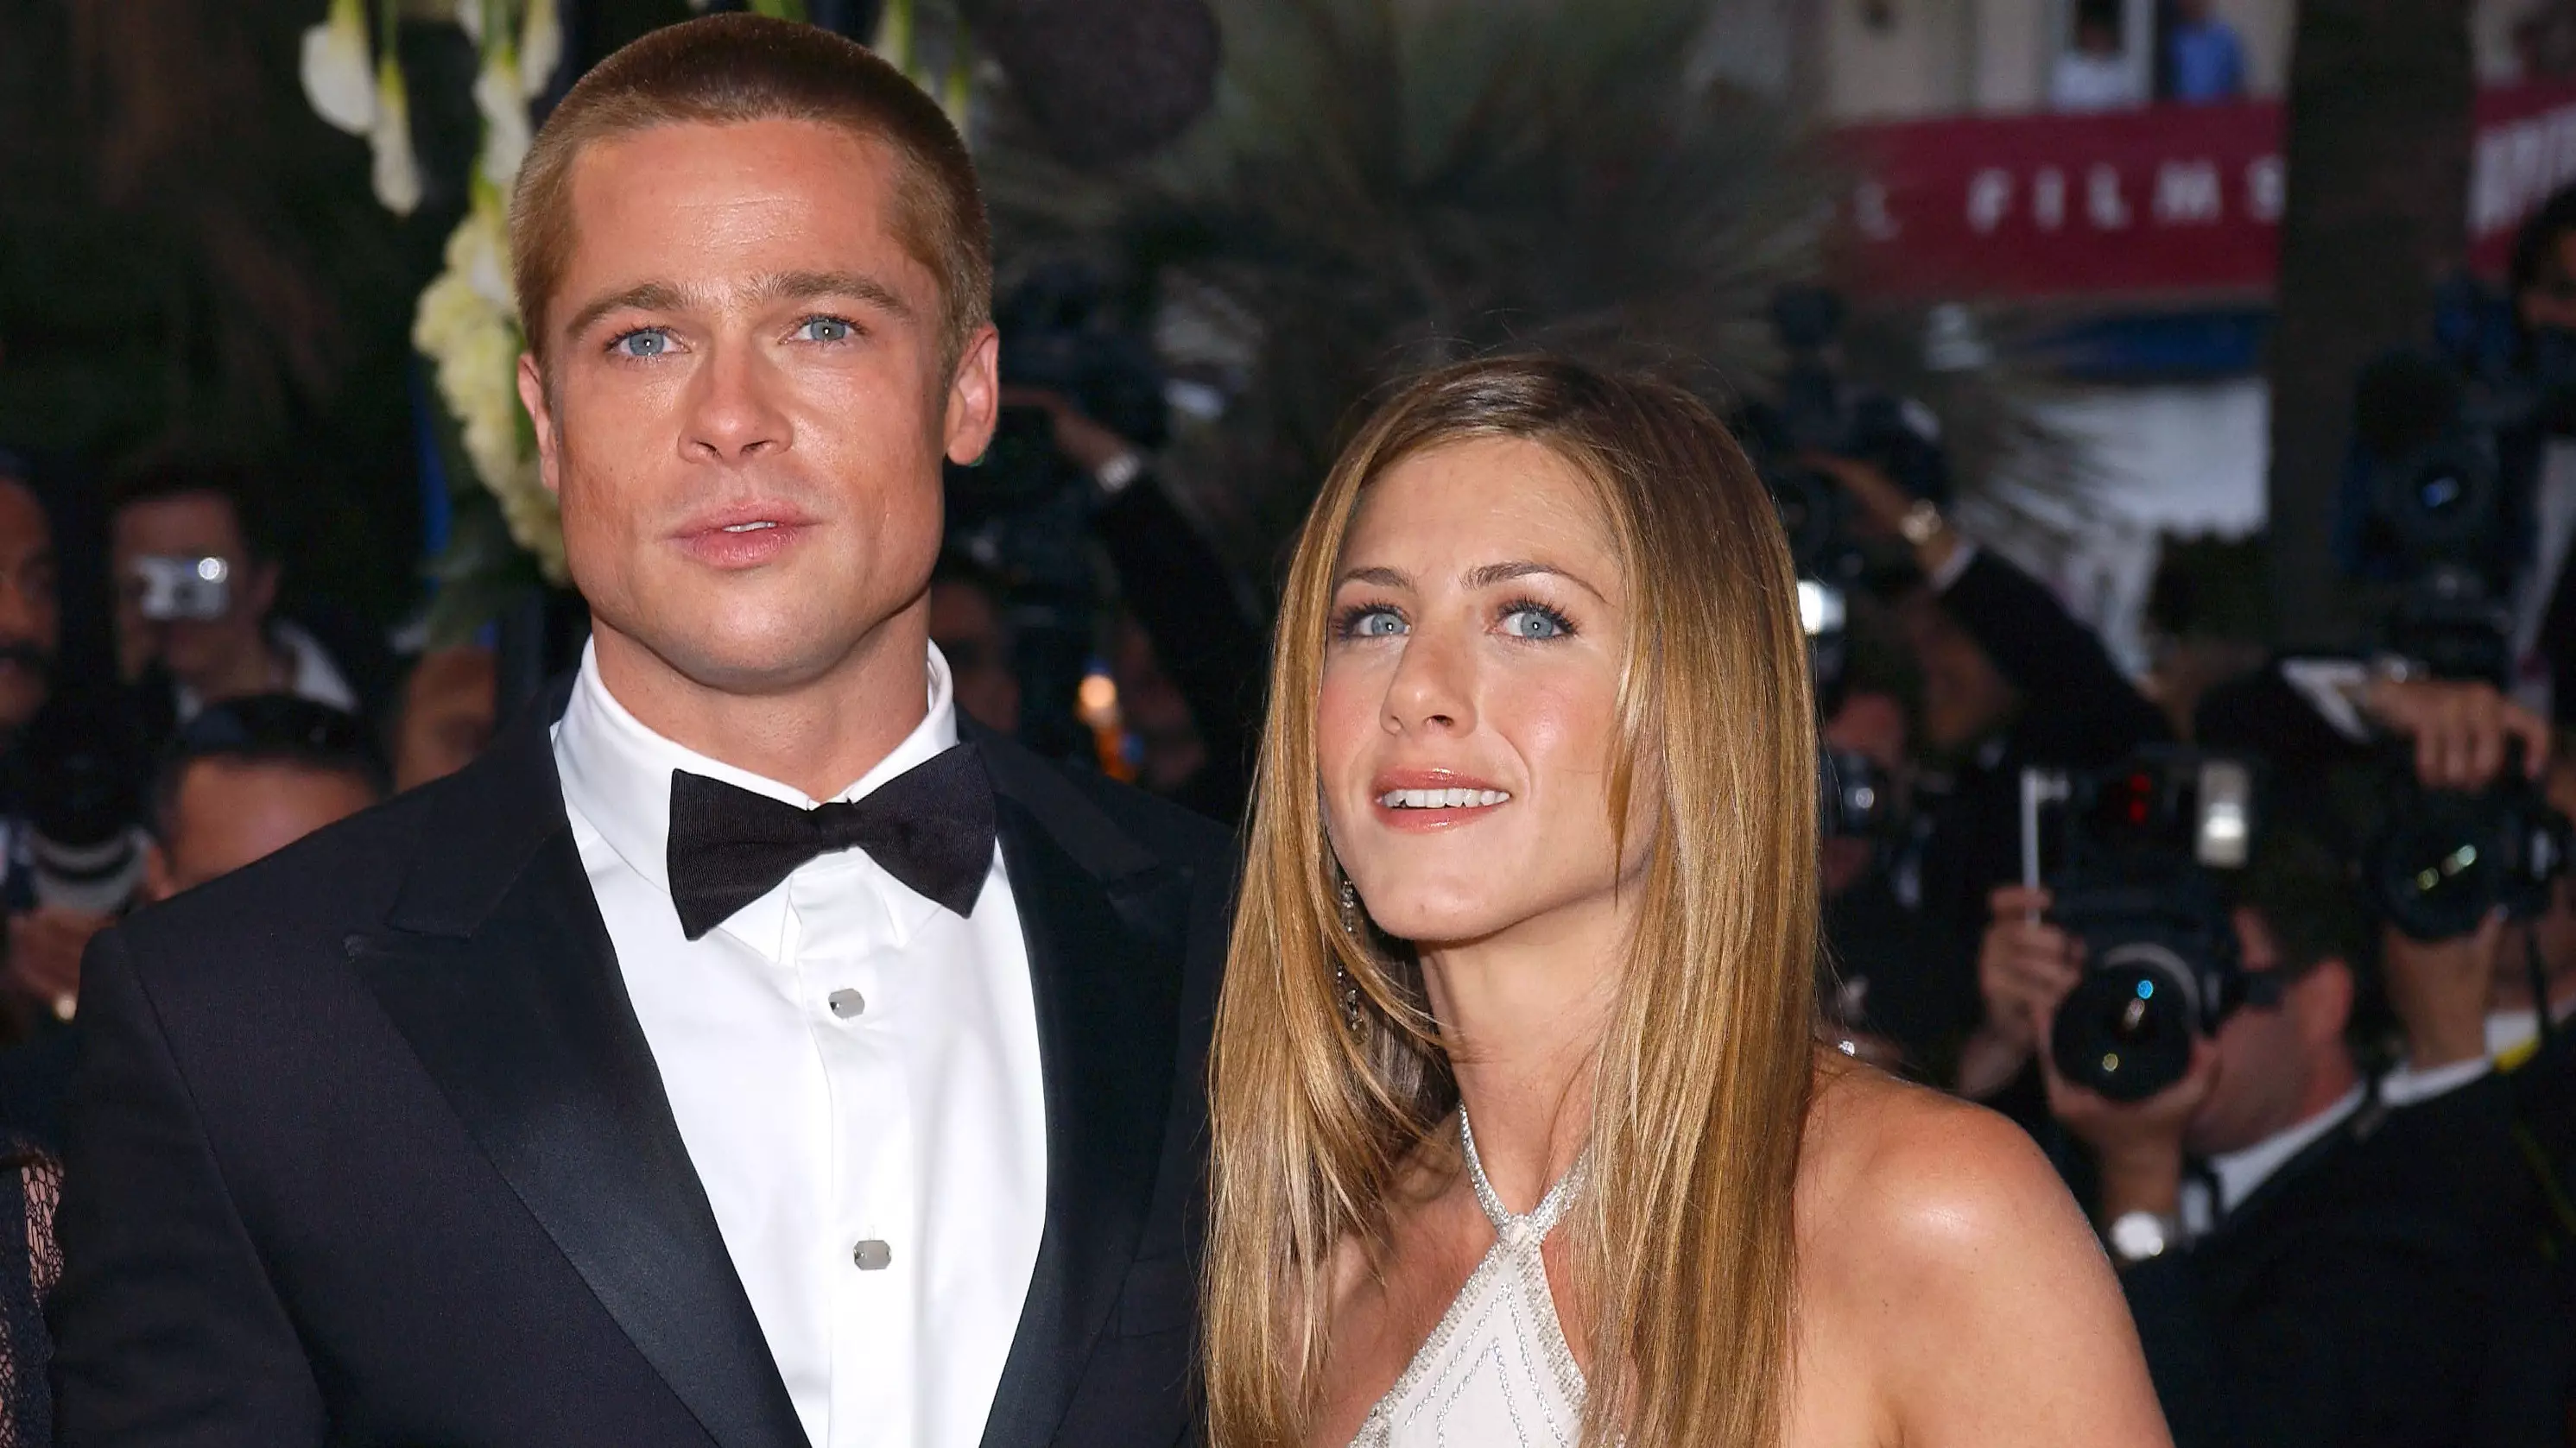 Brad Pitt And Jennifer Aniston Are Reuniting For Their First Work Project Together In Decades